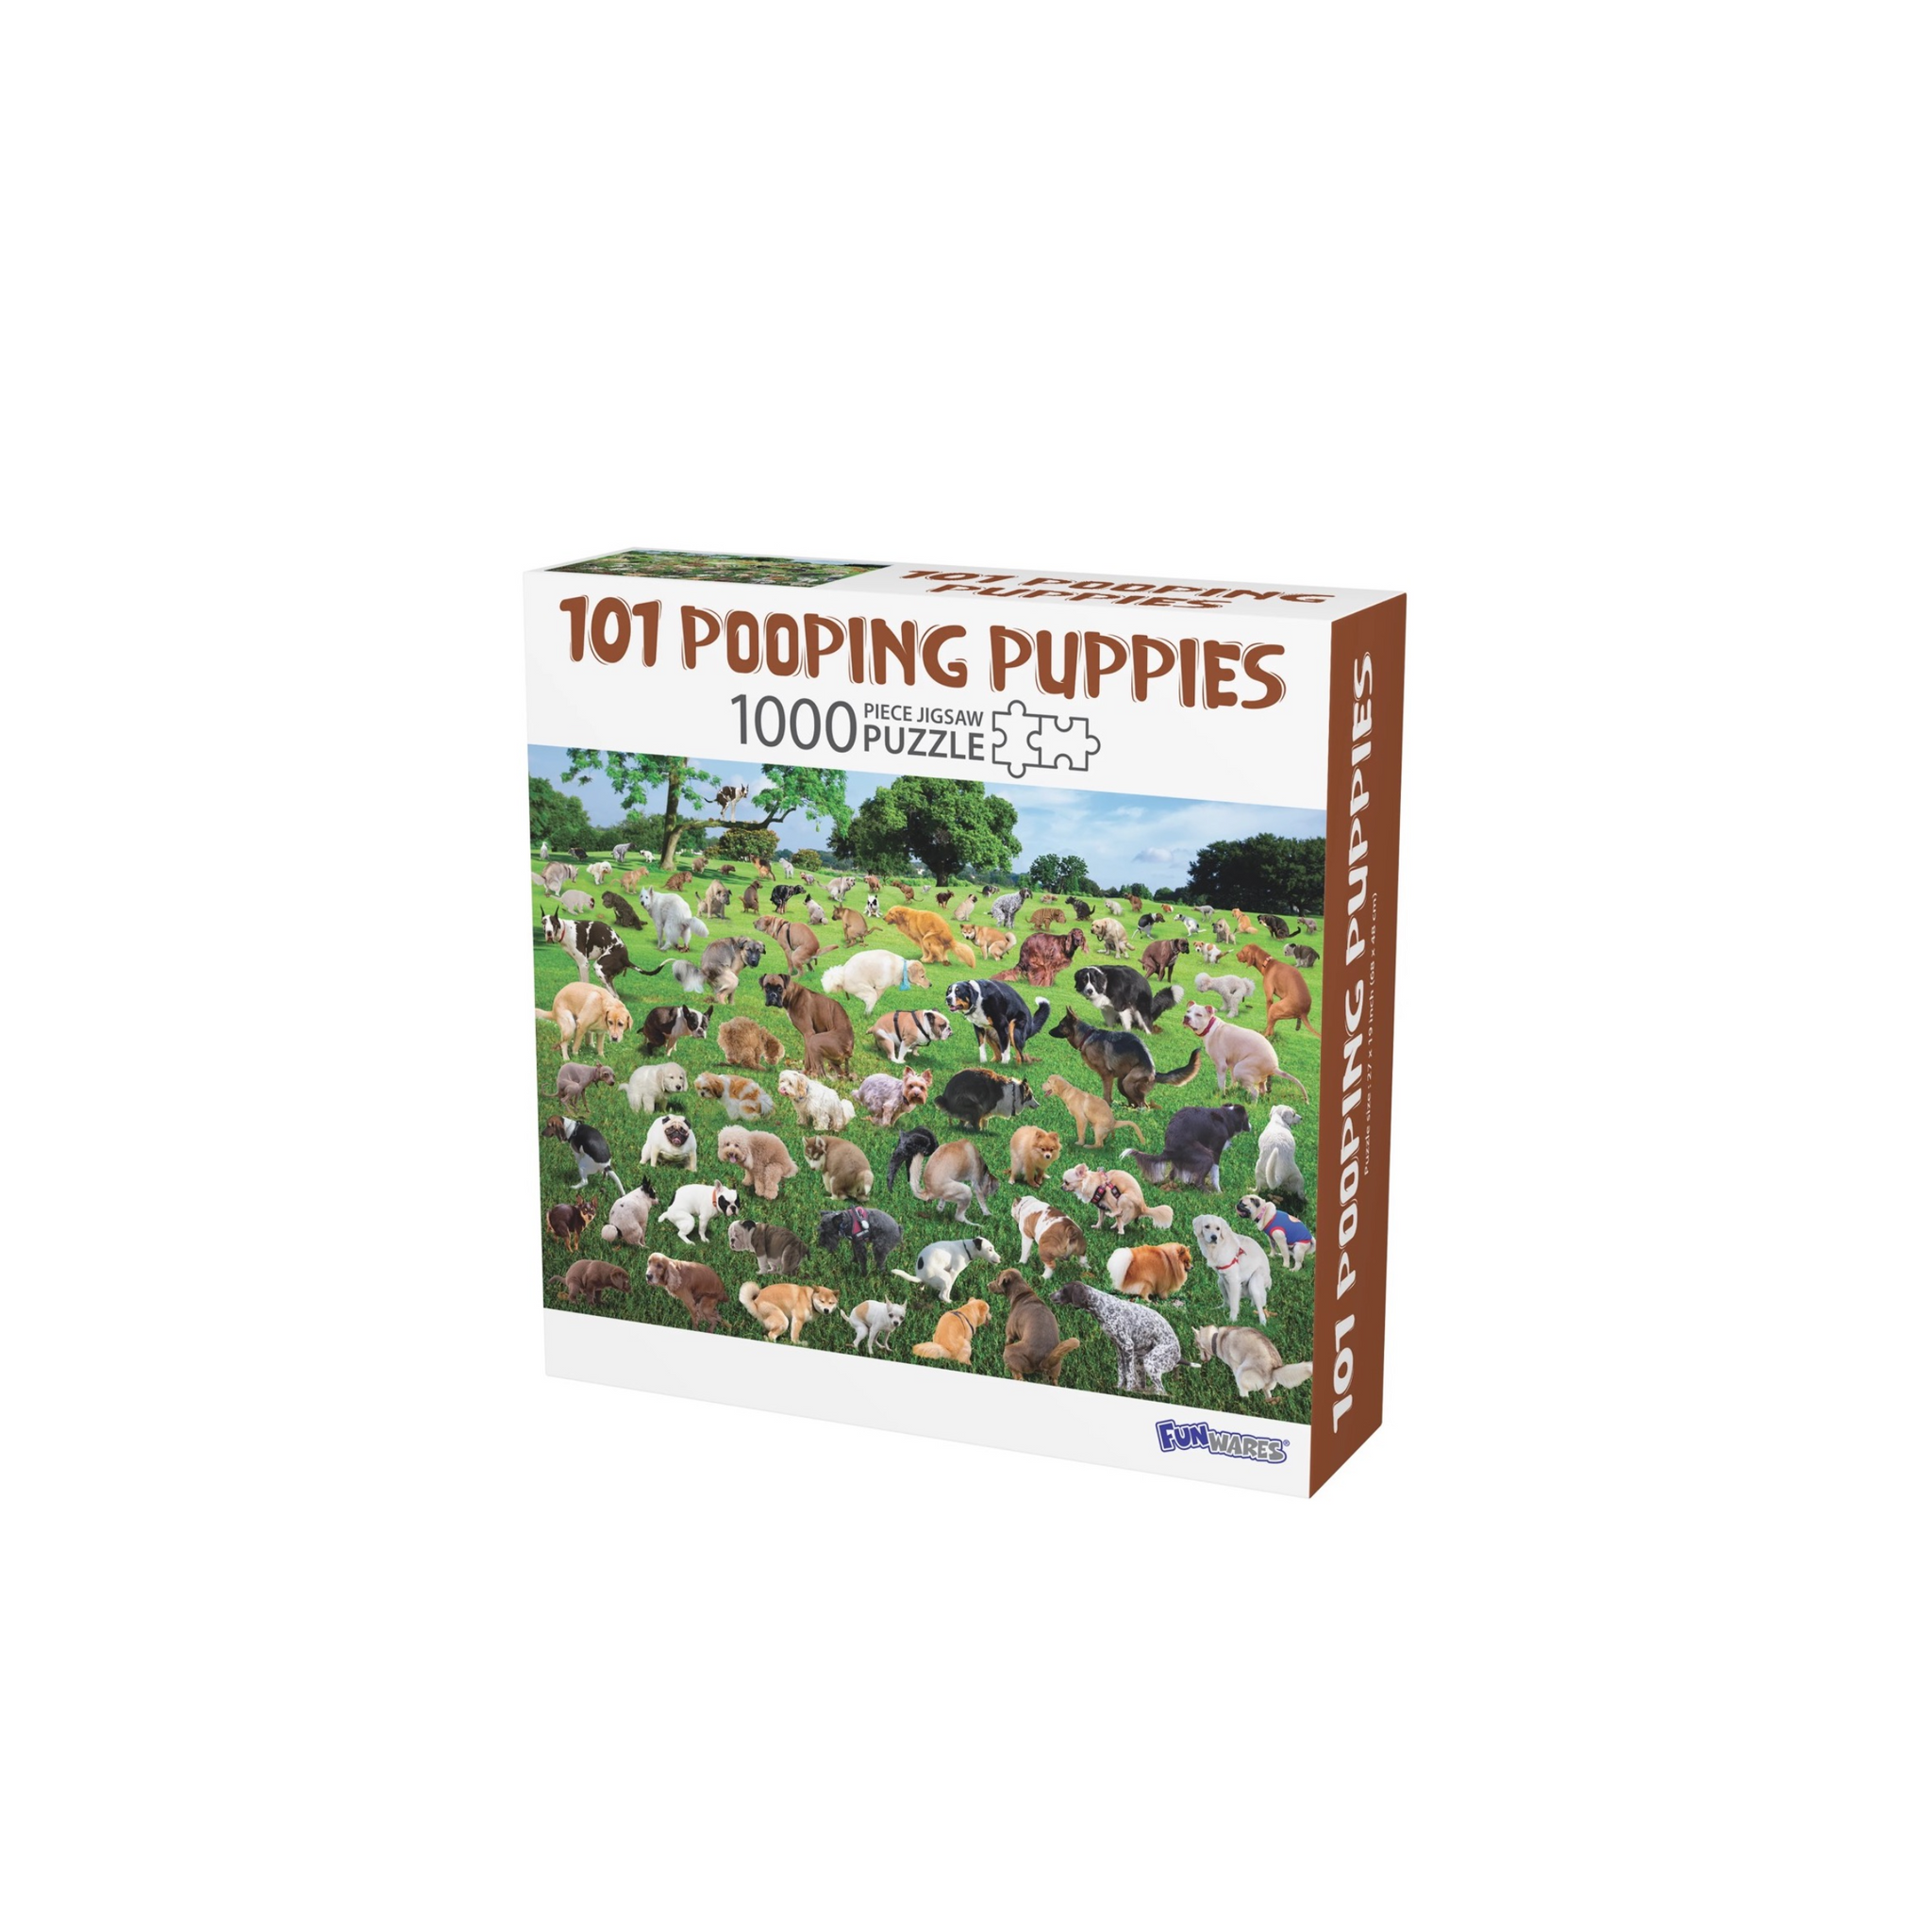 101 POOPING PUPPIES PUZZLE